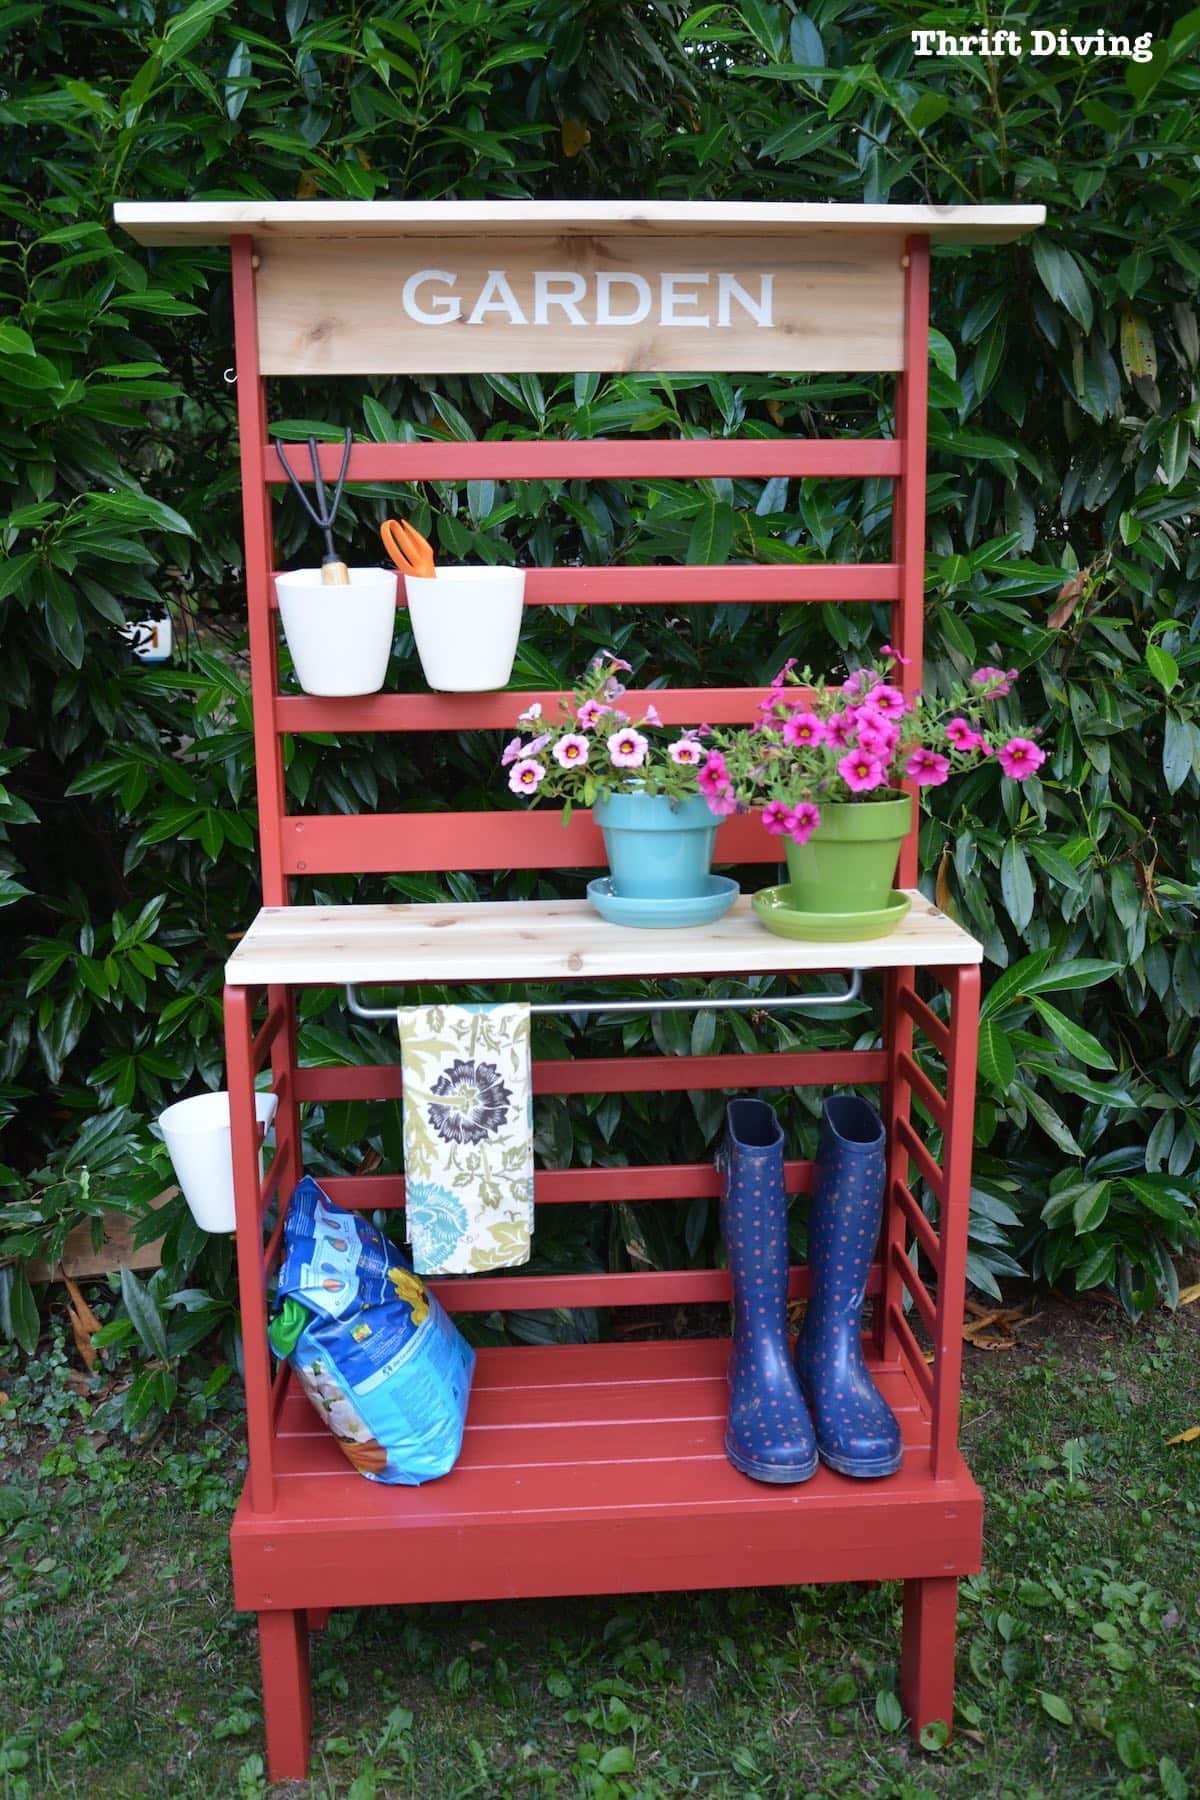 Repurposed toddler bed: What to do with an old toddler bed - Turn a toddler bed into a garden bench for your patio with storage and shelves for gardening, painted Poppy! - Thrift Diving